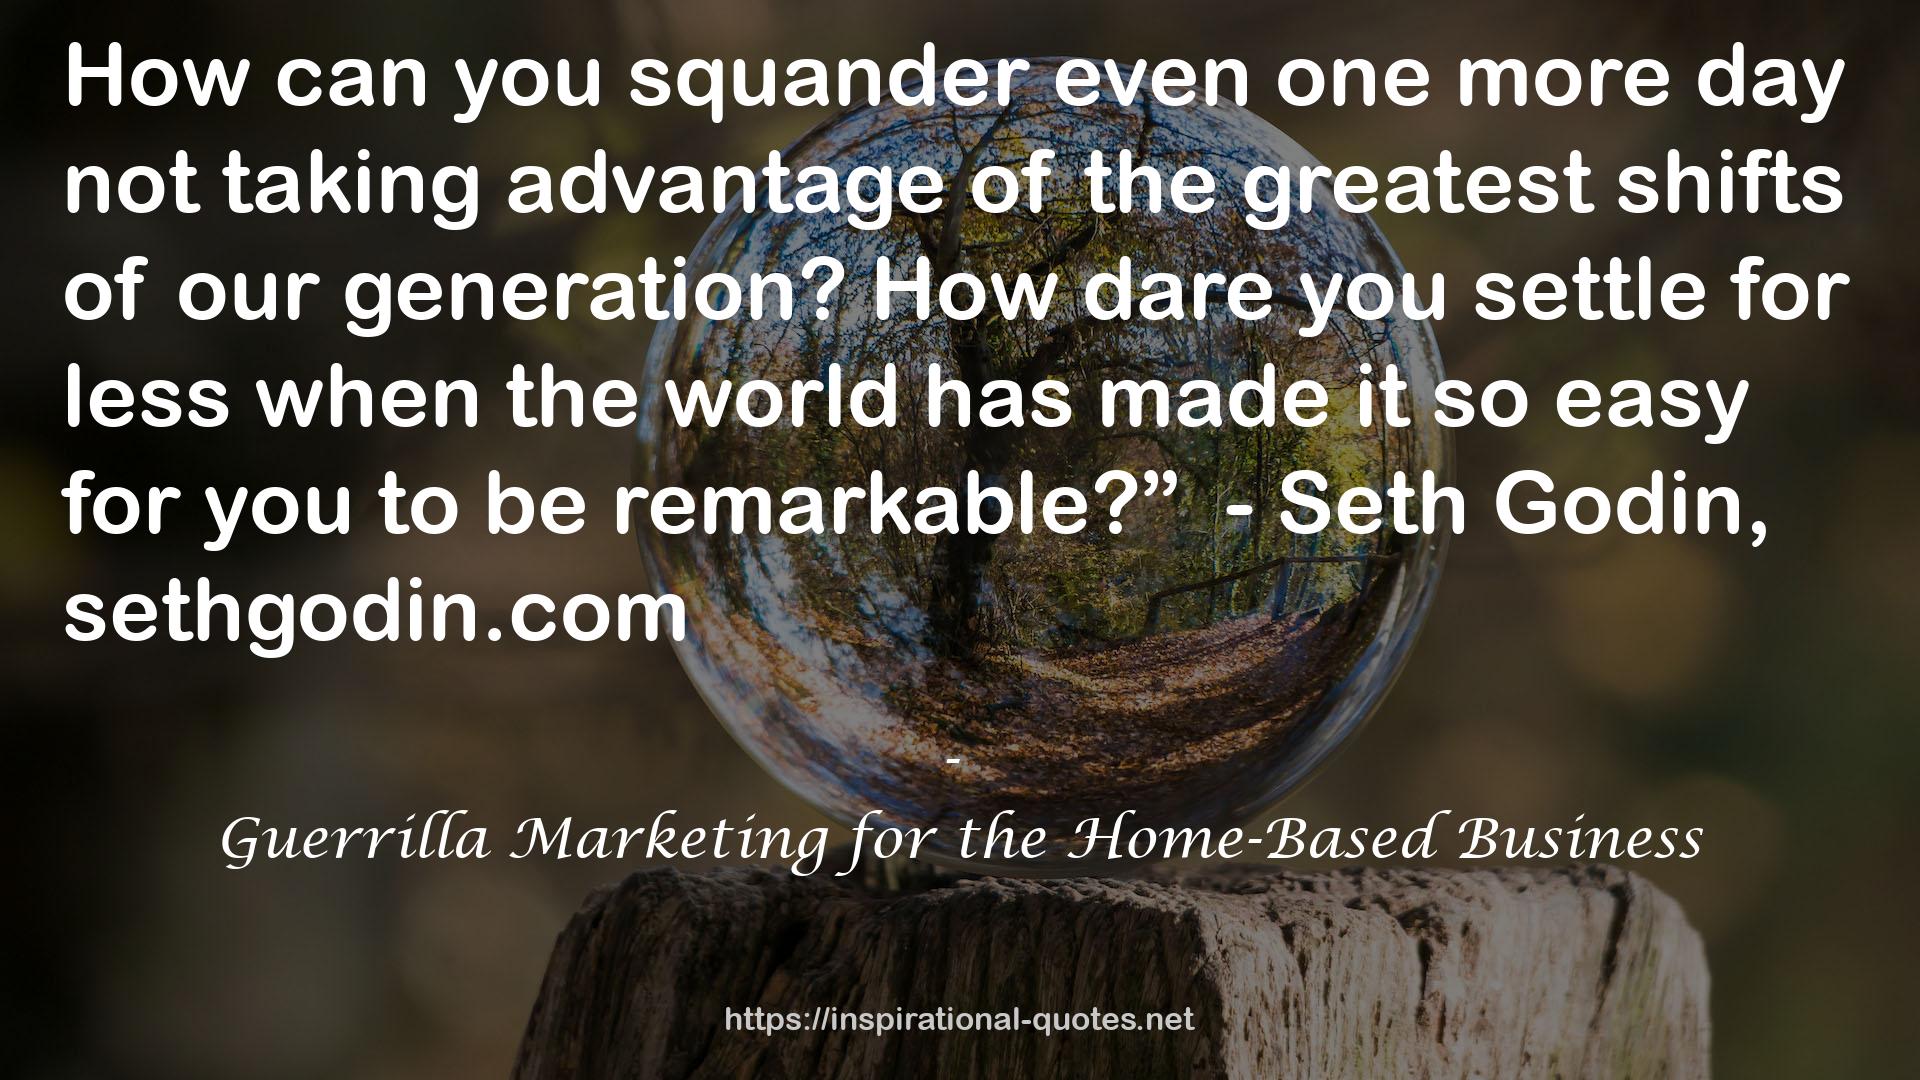 Guerrilla Marketing for the Home-Based Business QUOTES